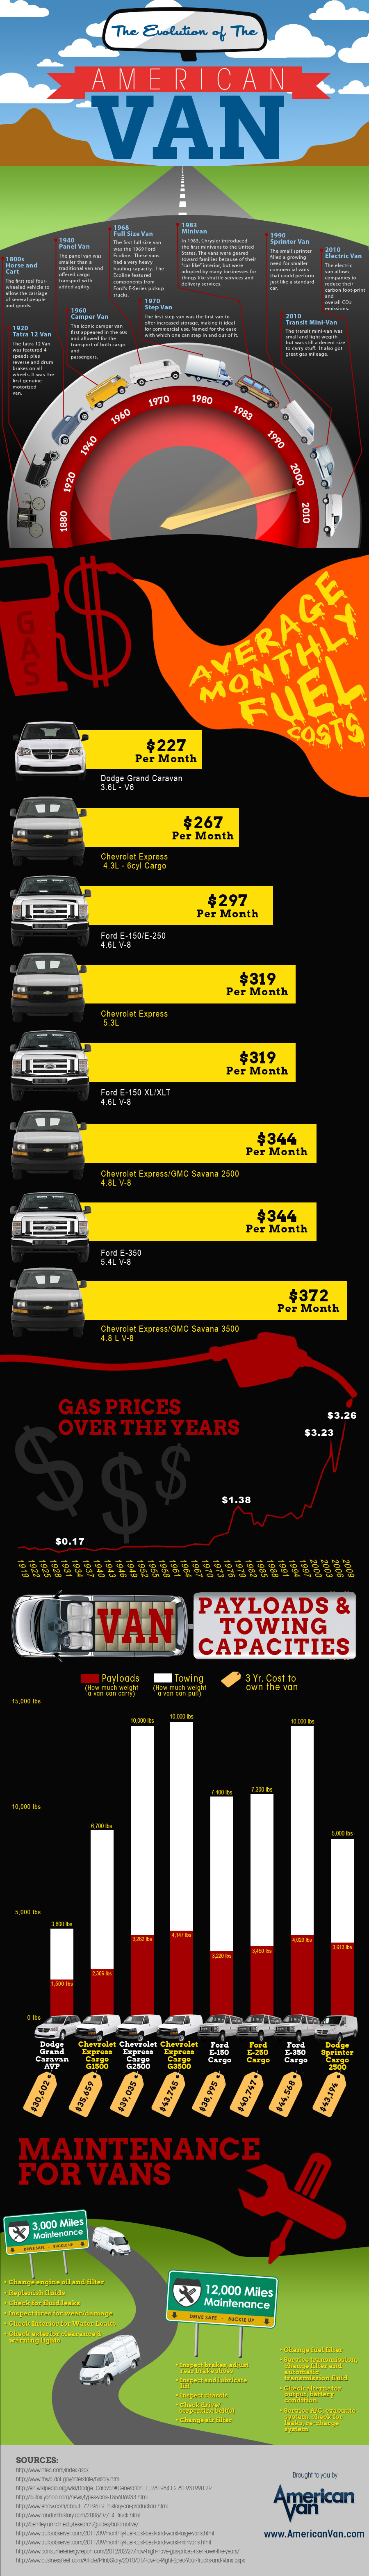 the-evolution-of-the-american-van-infographic_50f6e79d9929b